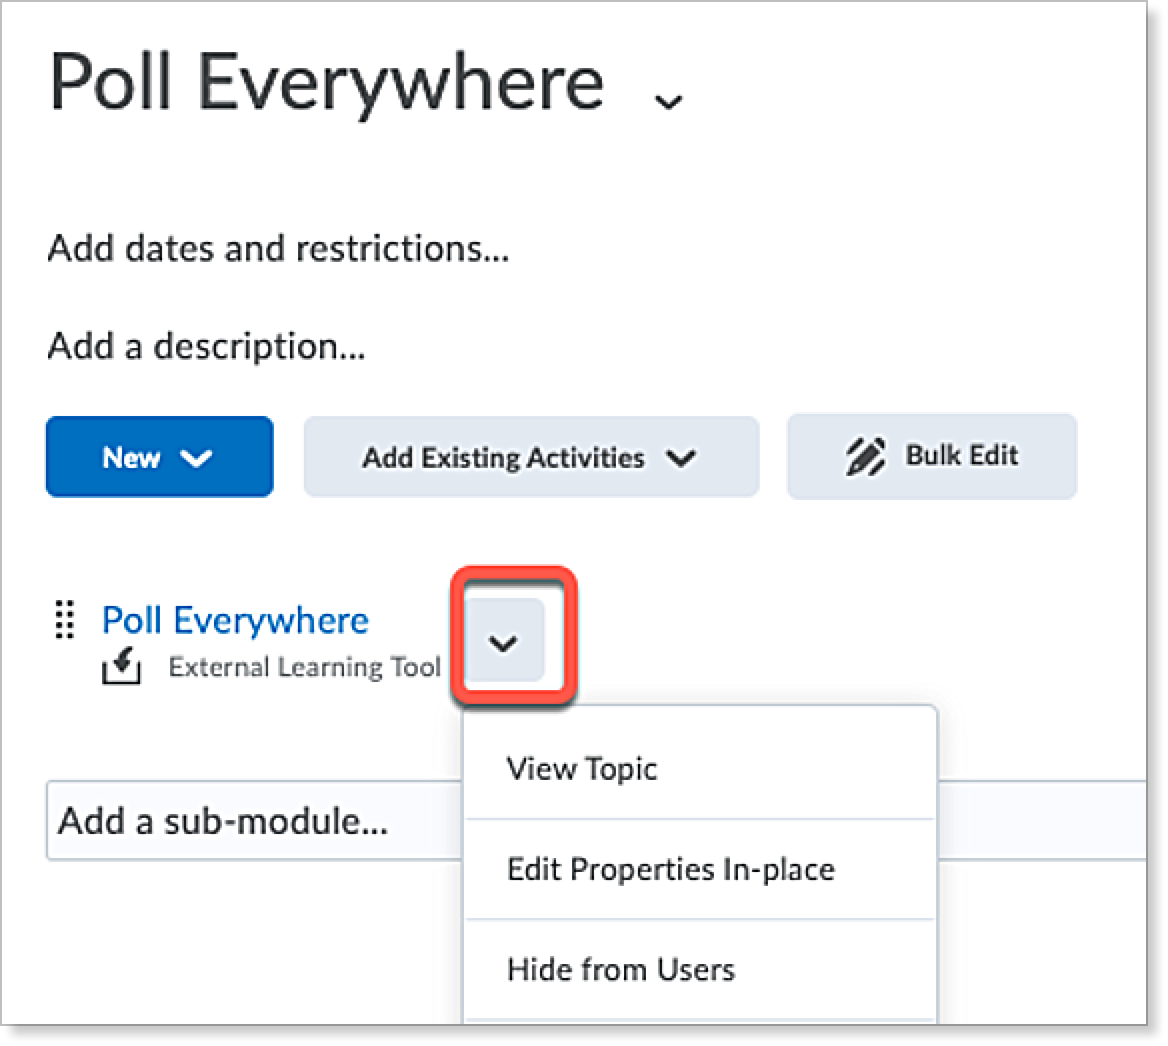 poll everywhere external learning tool link